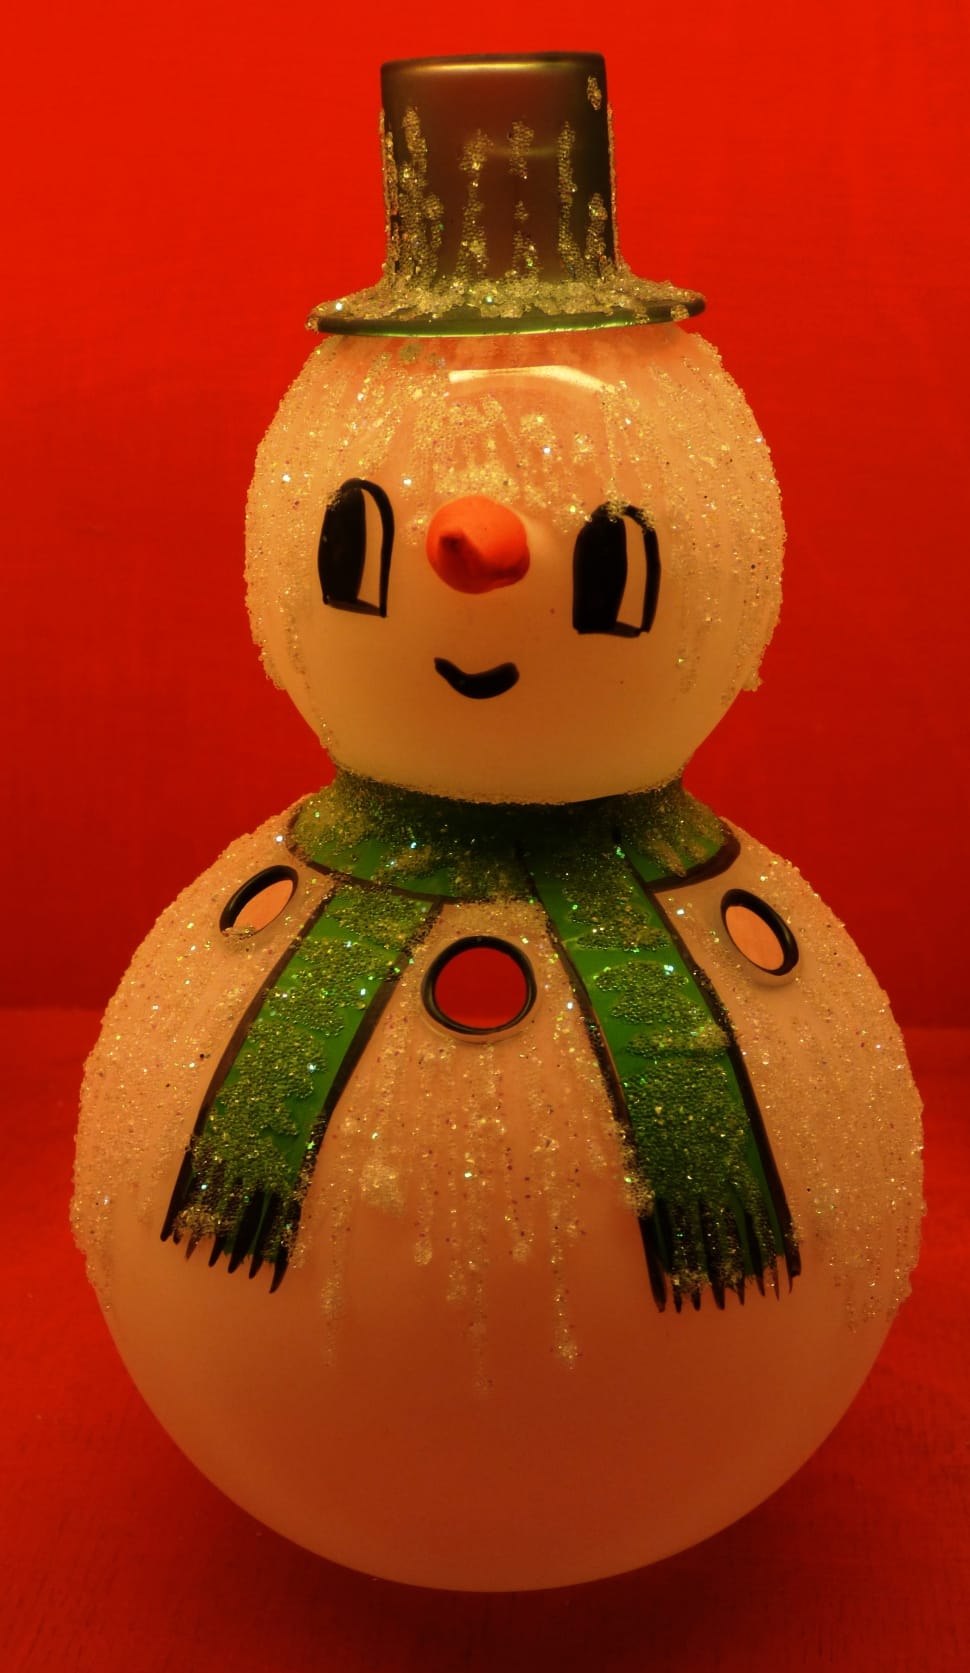 closed up photo of snowman figurine wearing green scarf and hat preview